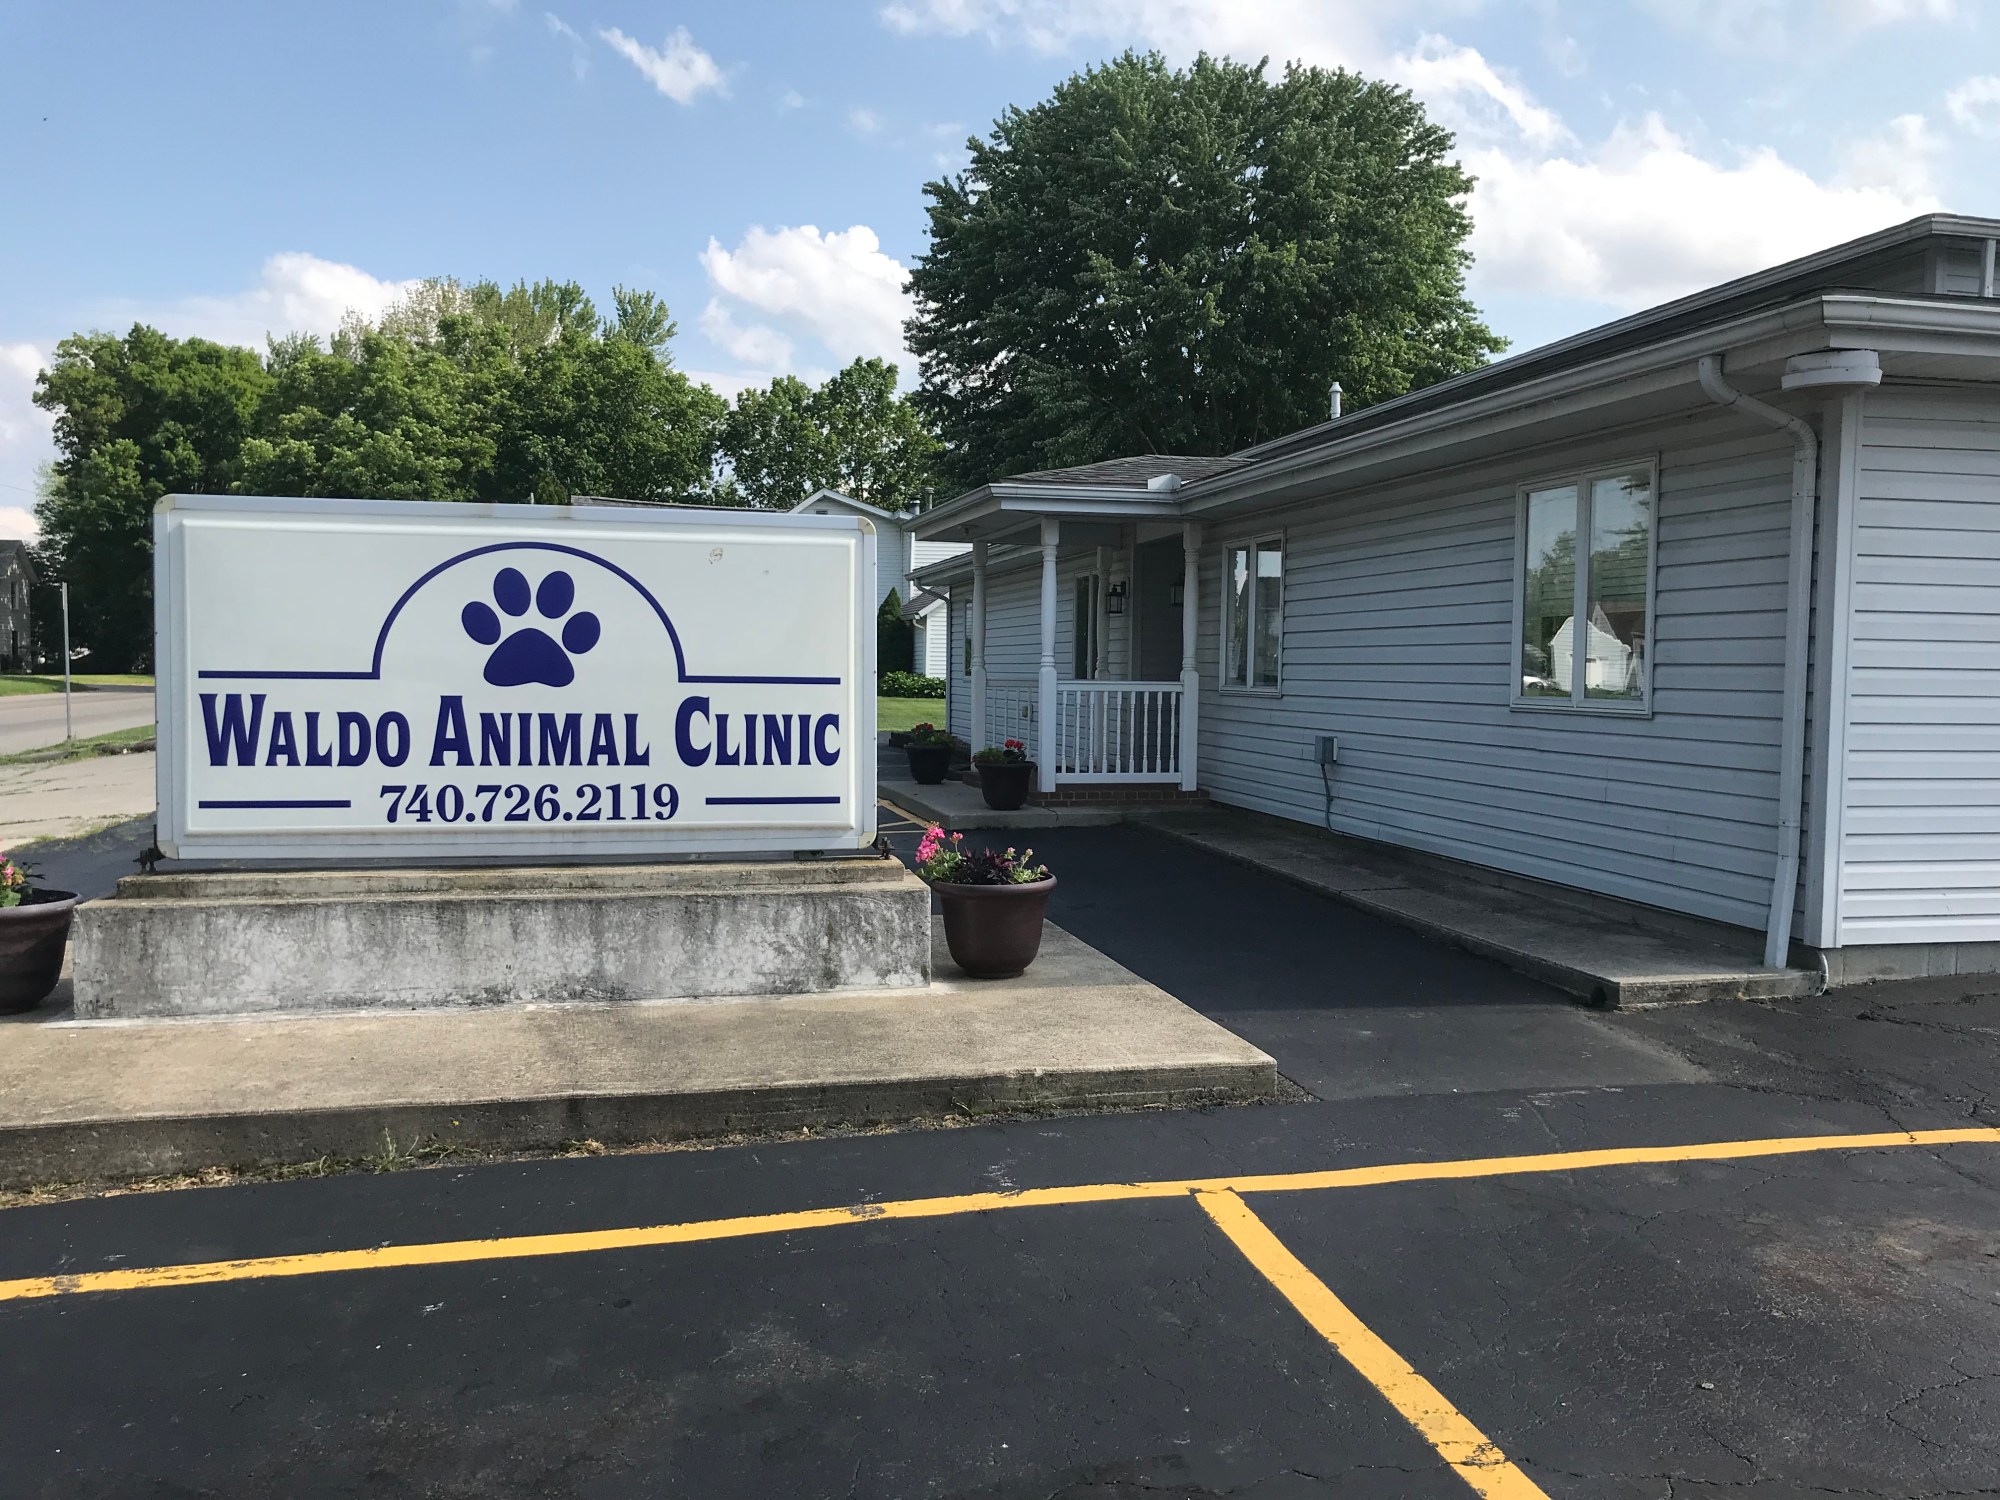 Contact Our Saint Augustine Veterinarians at Moultrie Animal Clinic